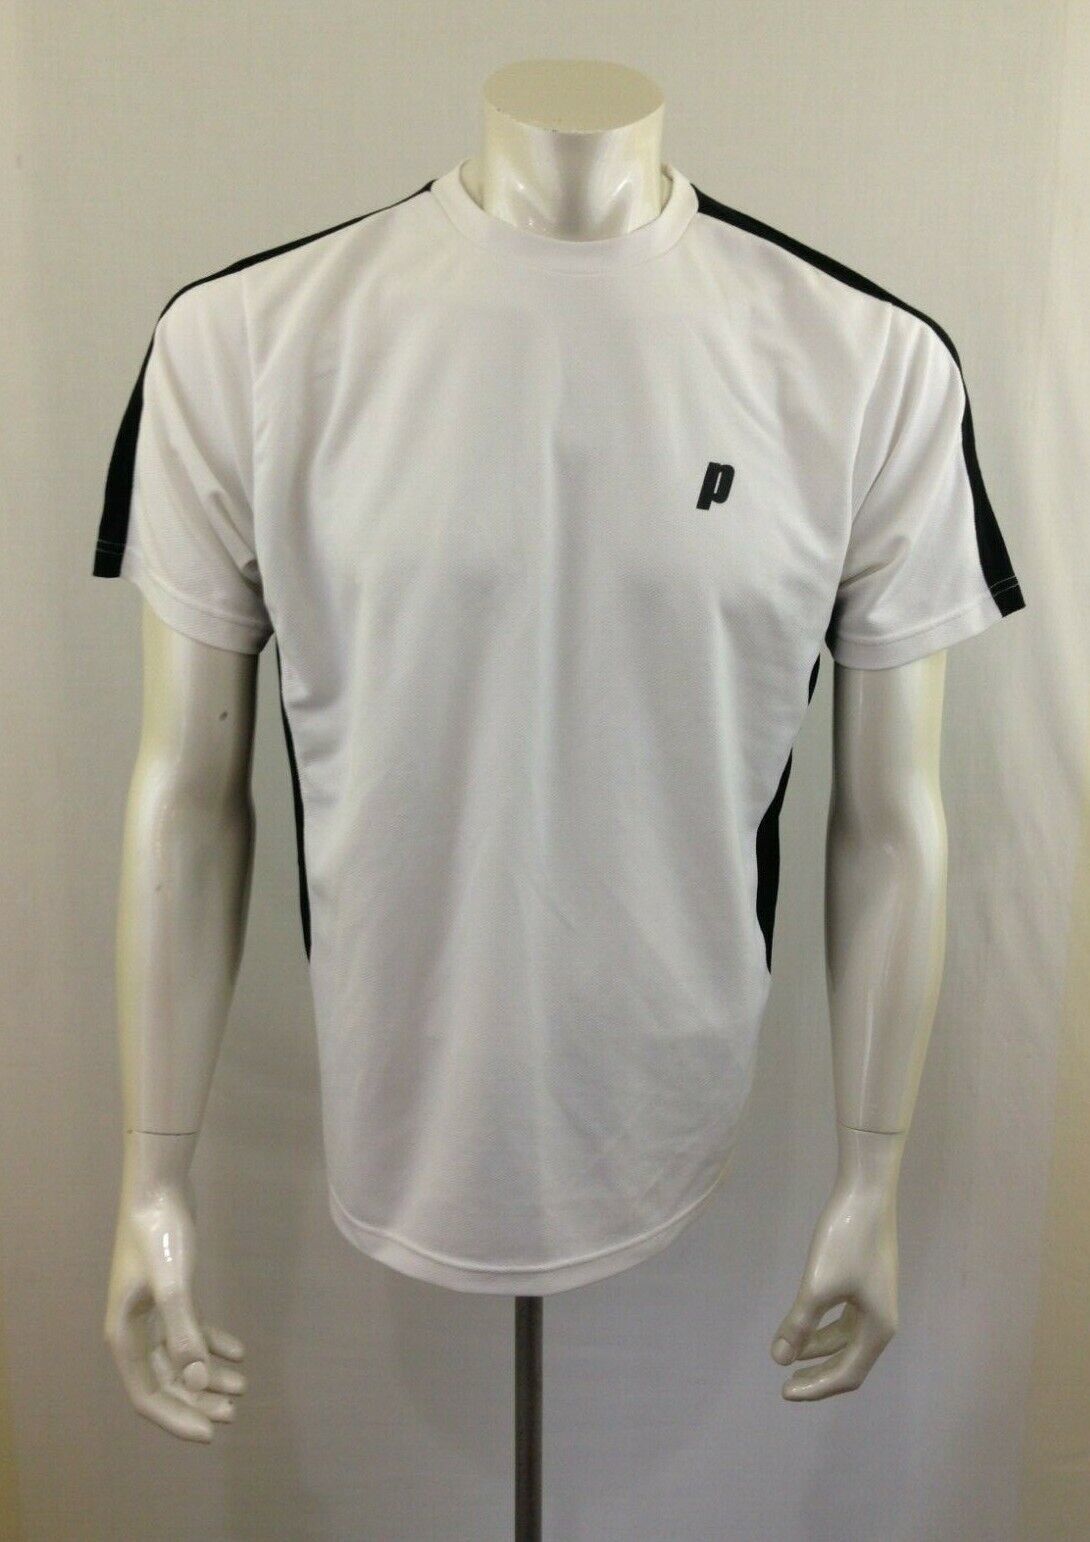 Primary image for Prince Men's Polyester Short Sleeve Crew Neck White Black Athletic Shirt Size M